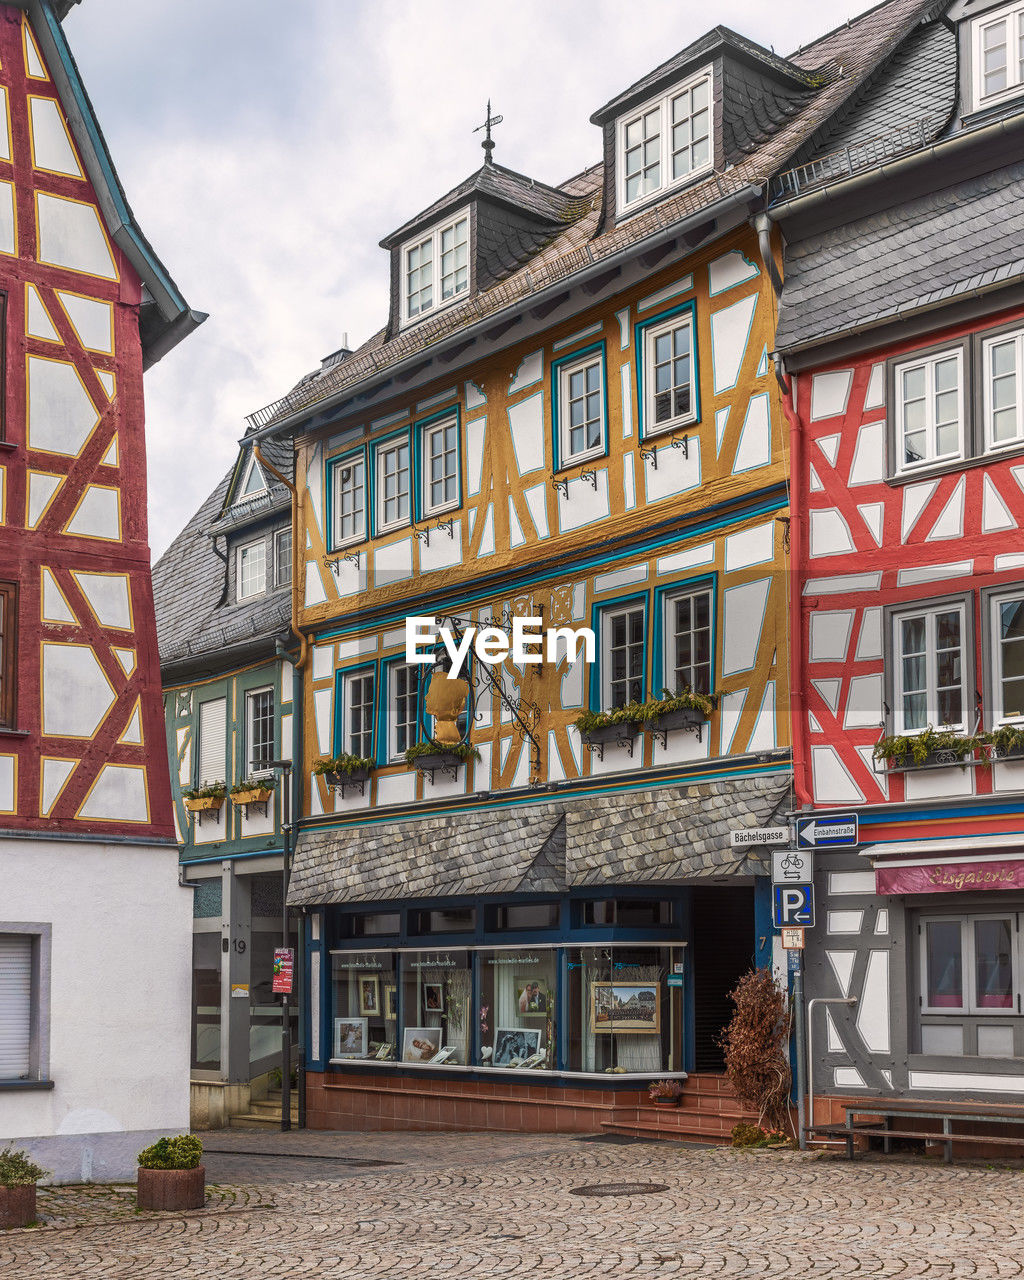 Picturesque german medieval colorful architecture in bad camberg, hesse, germany